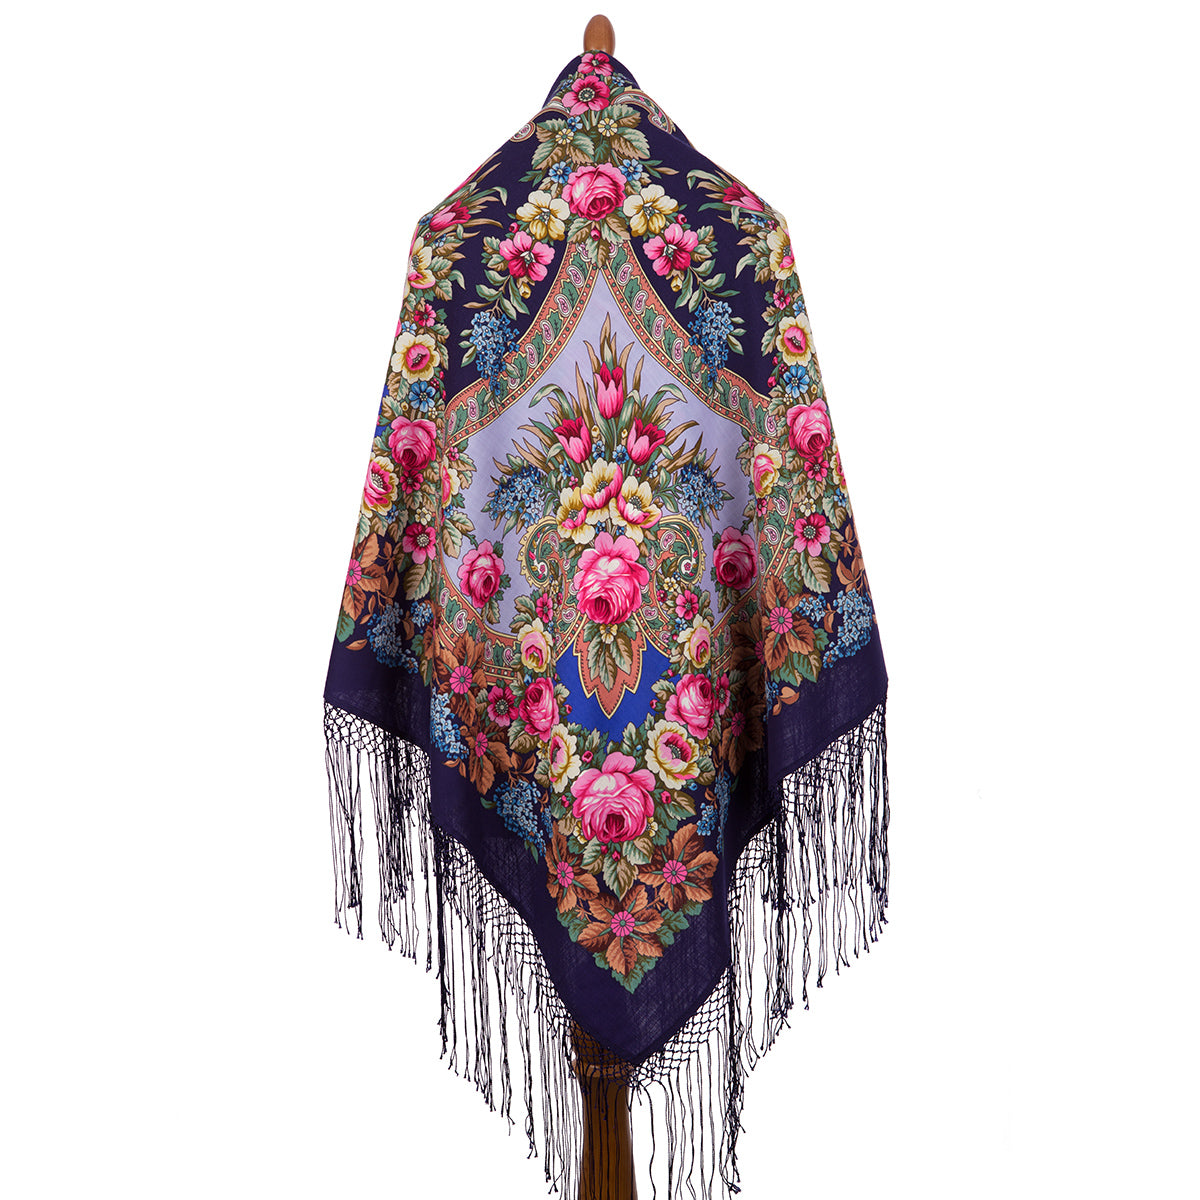 Shawl  "Remembrance about summer"